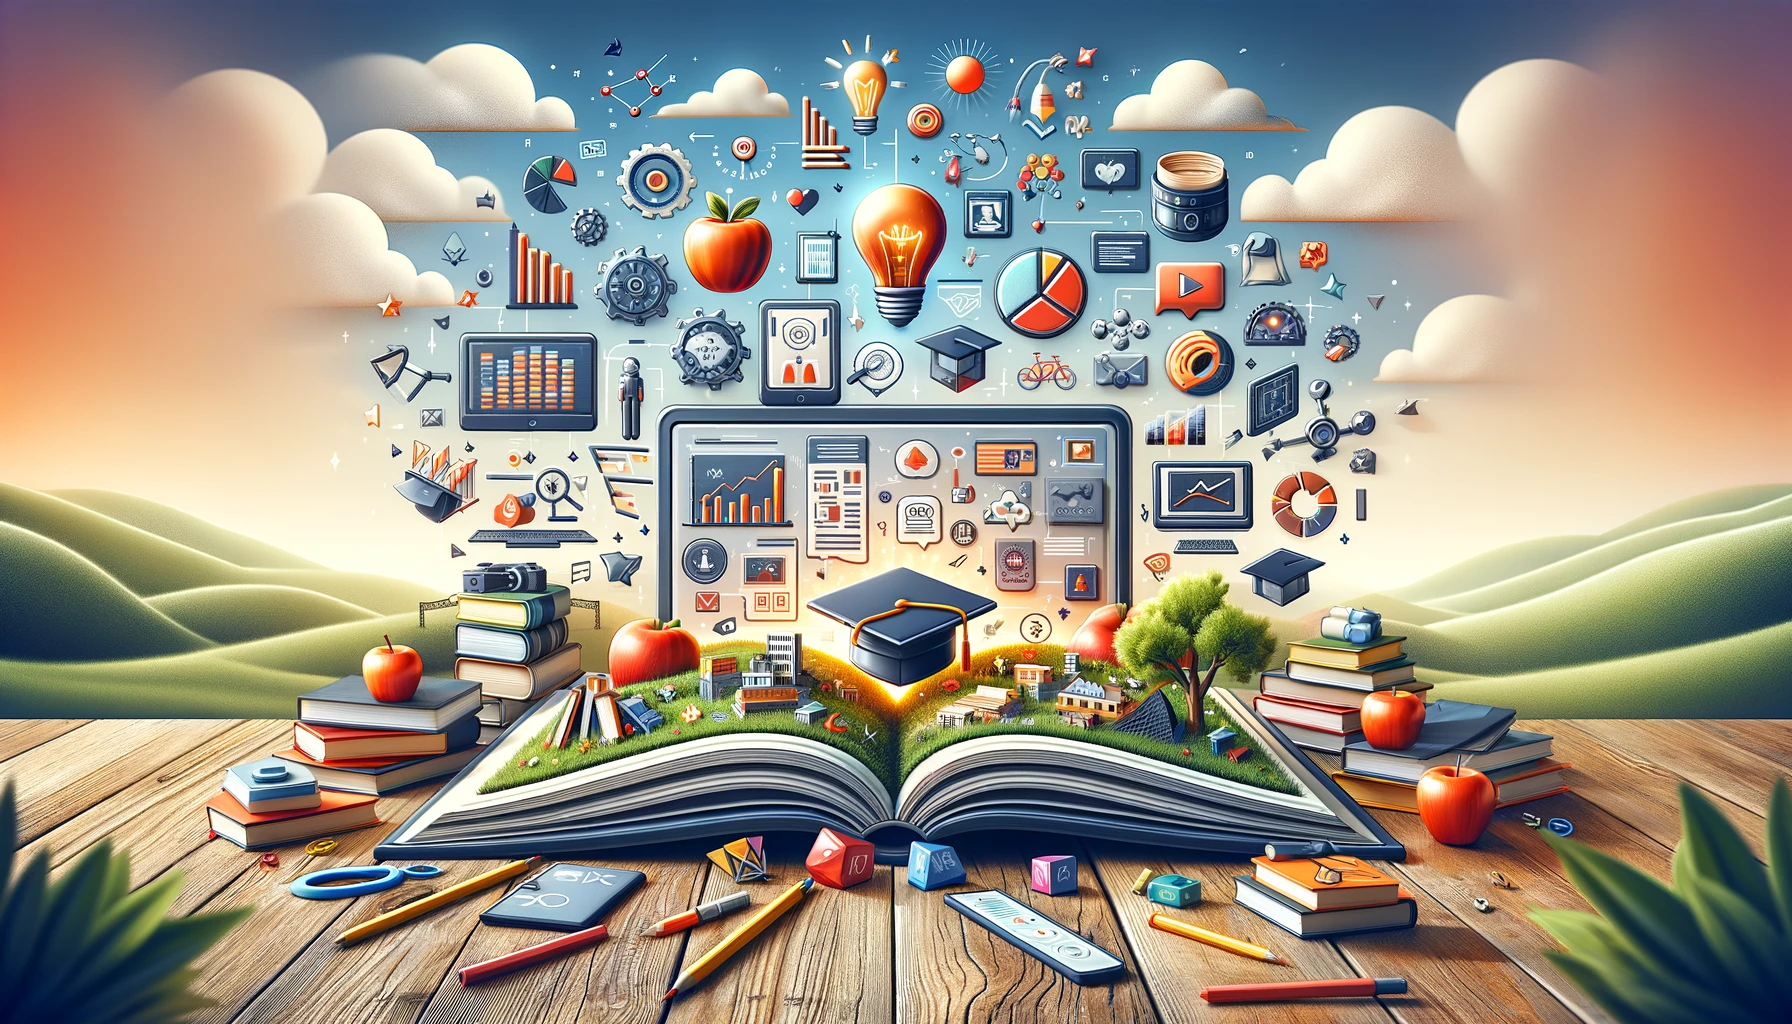 A landscape-oriented image depicting the concept of digital marketing free resources and the concept of education/knowledge